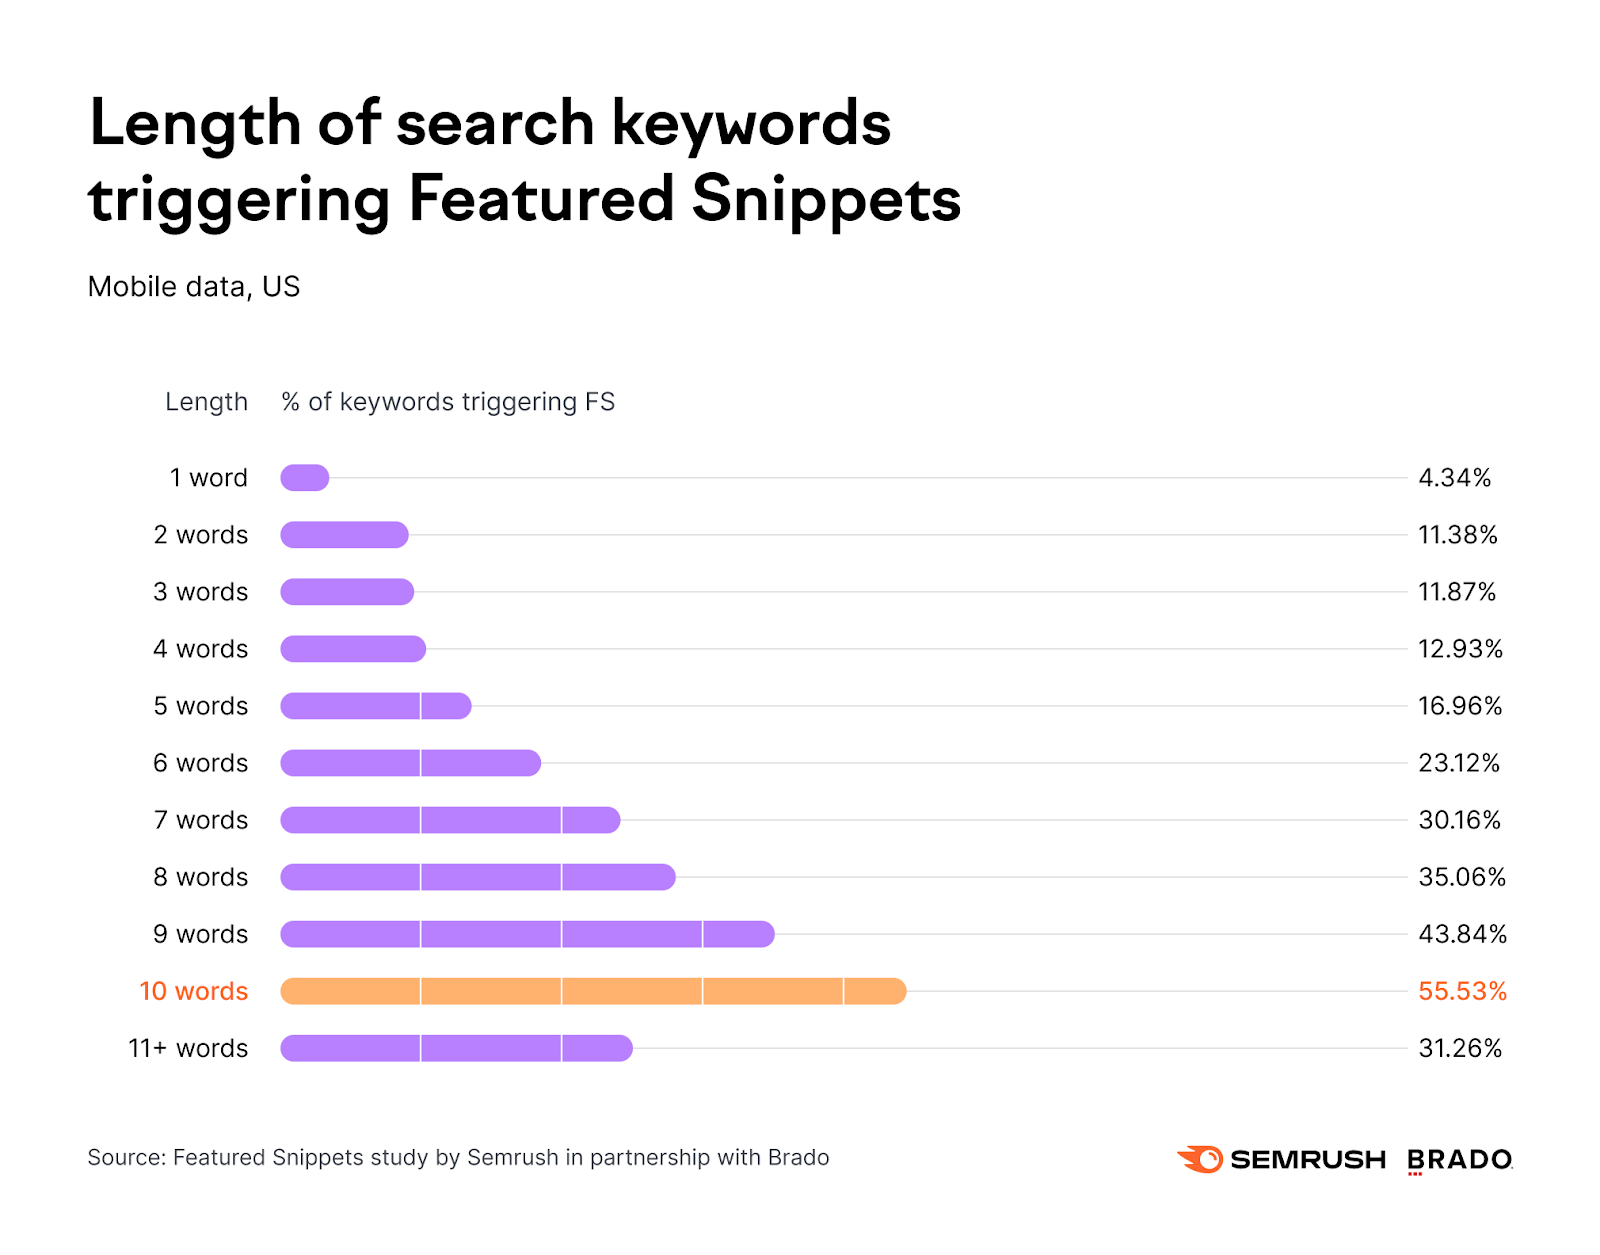 "Length of search keywords triggering featured snippets" graph by Semrush